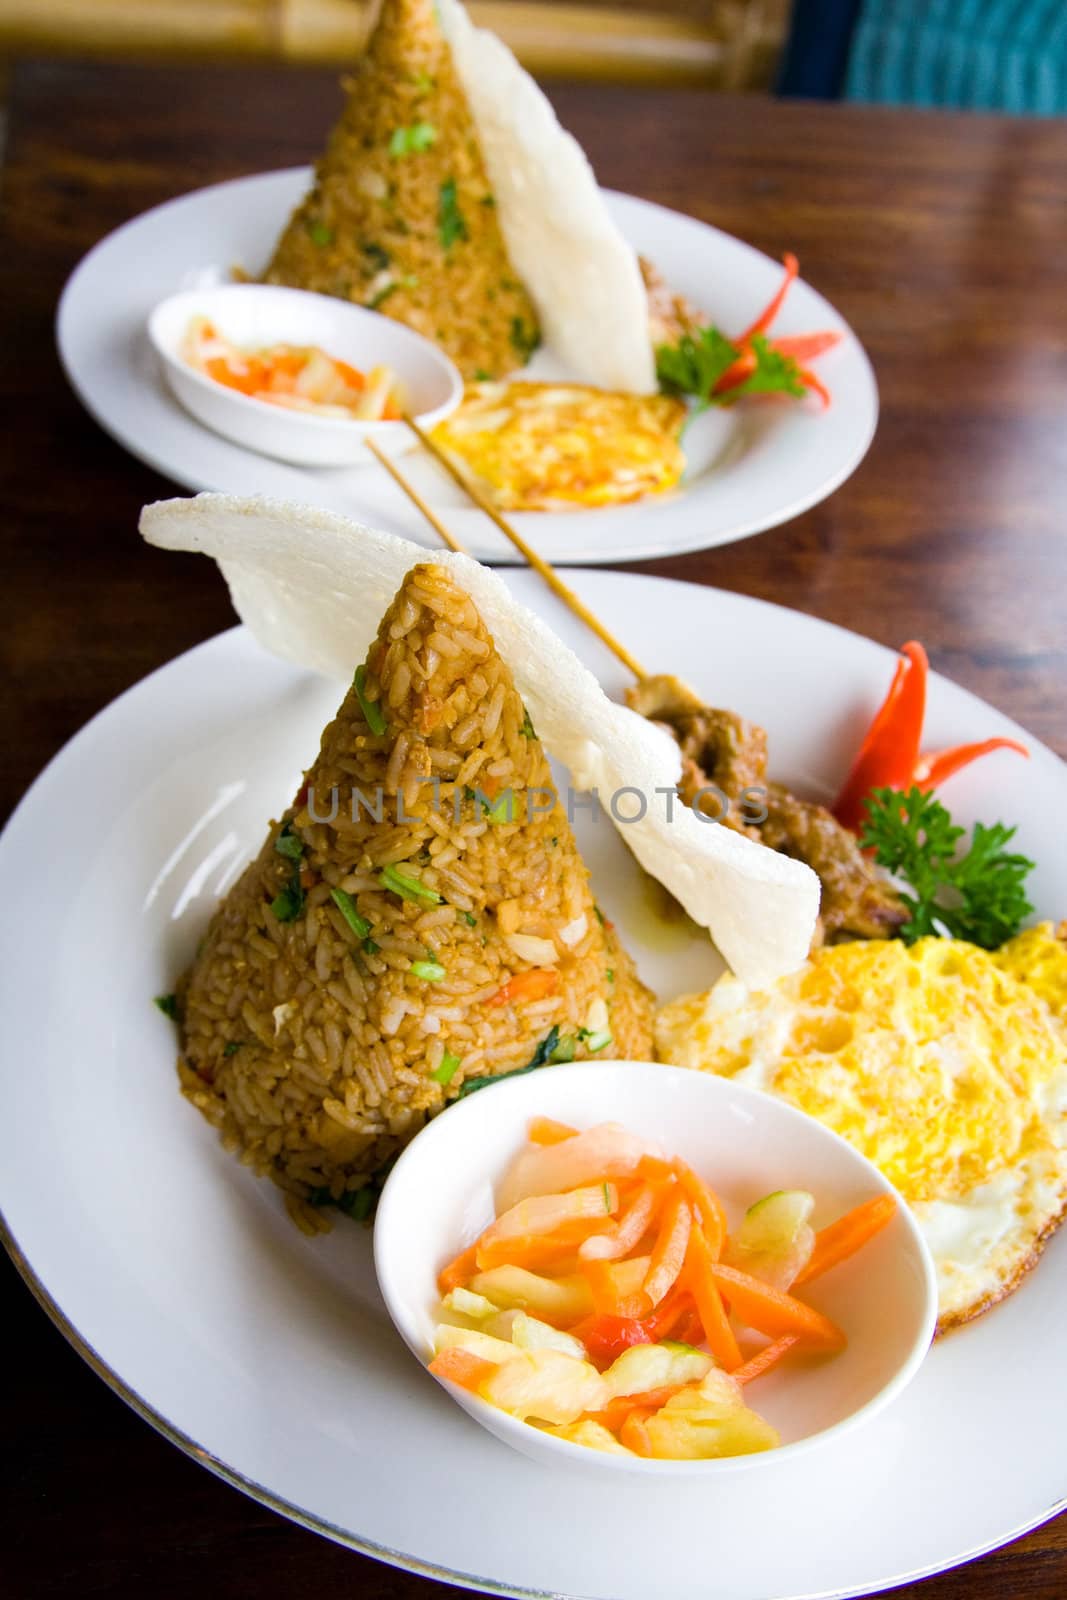 Typical Indonesian food from rice called nasi goreng.